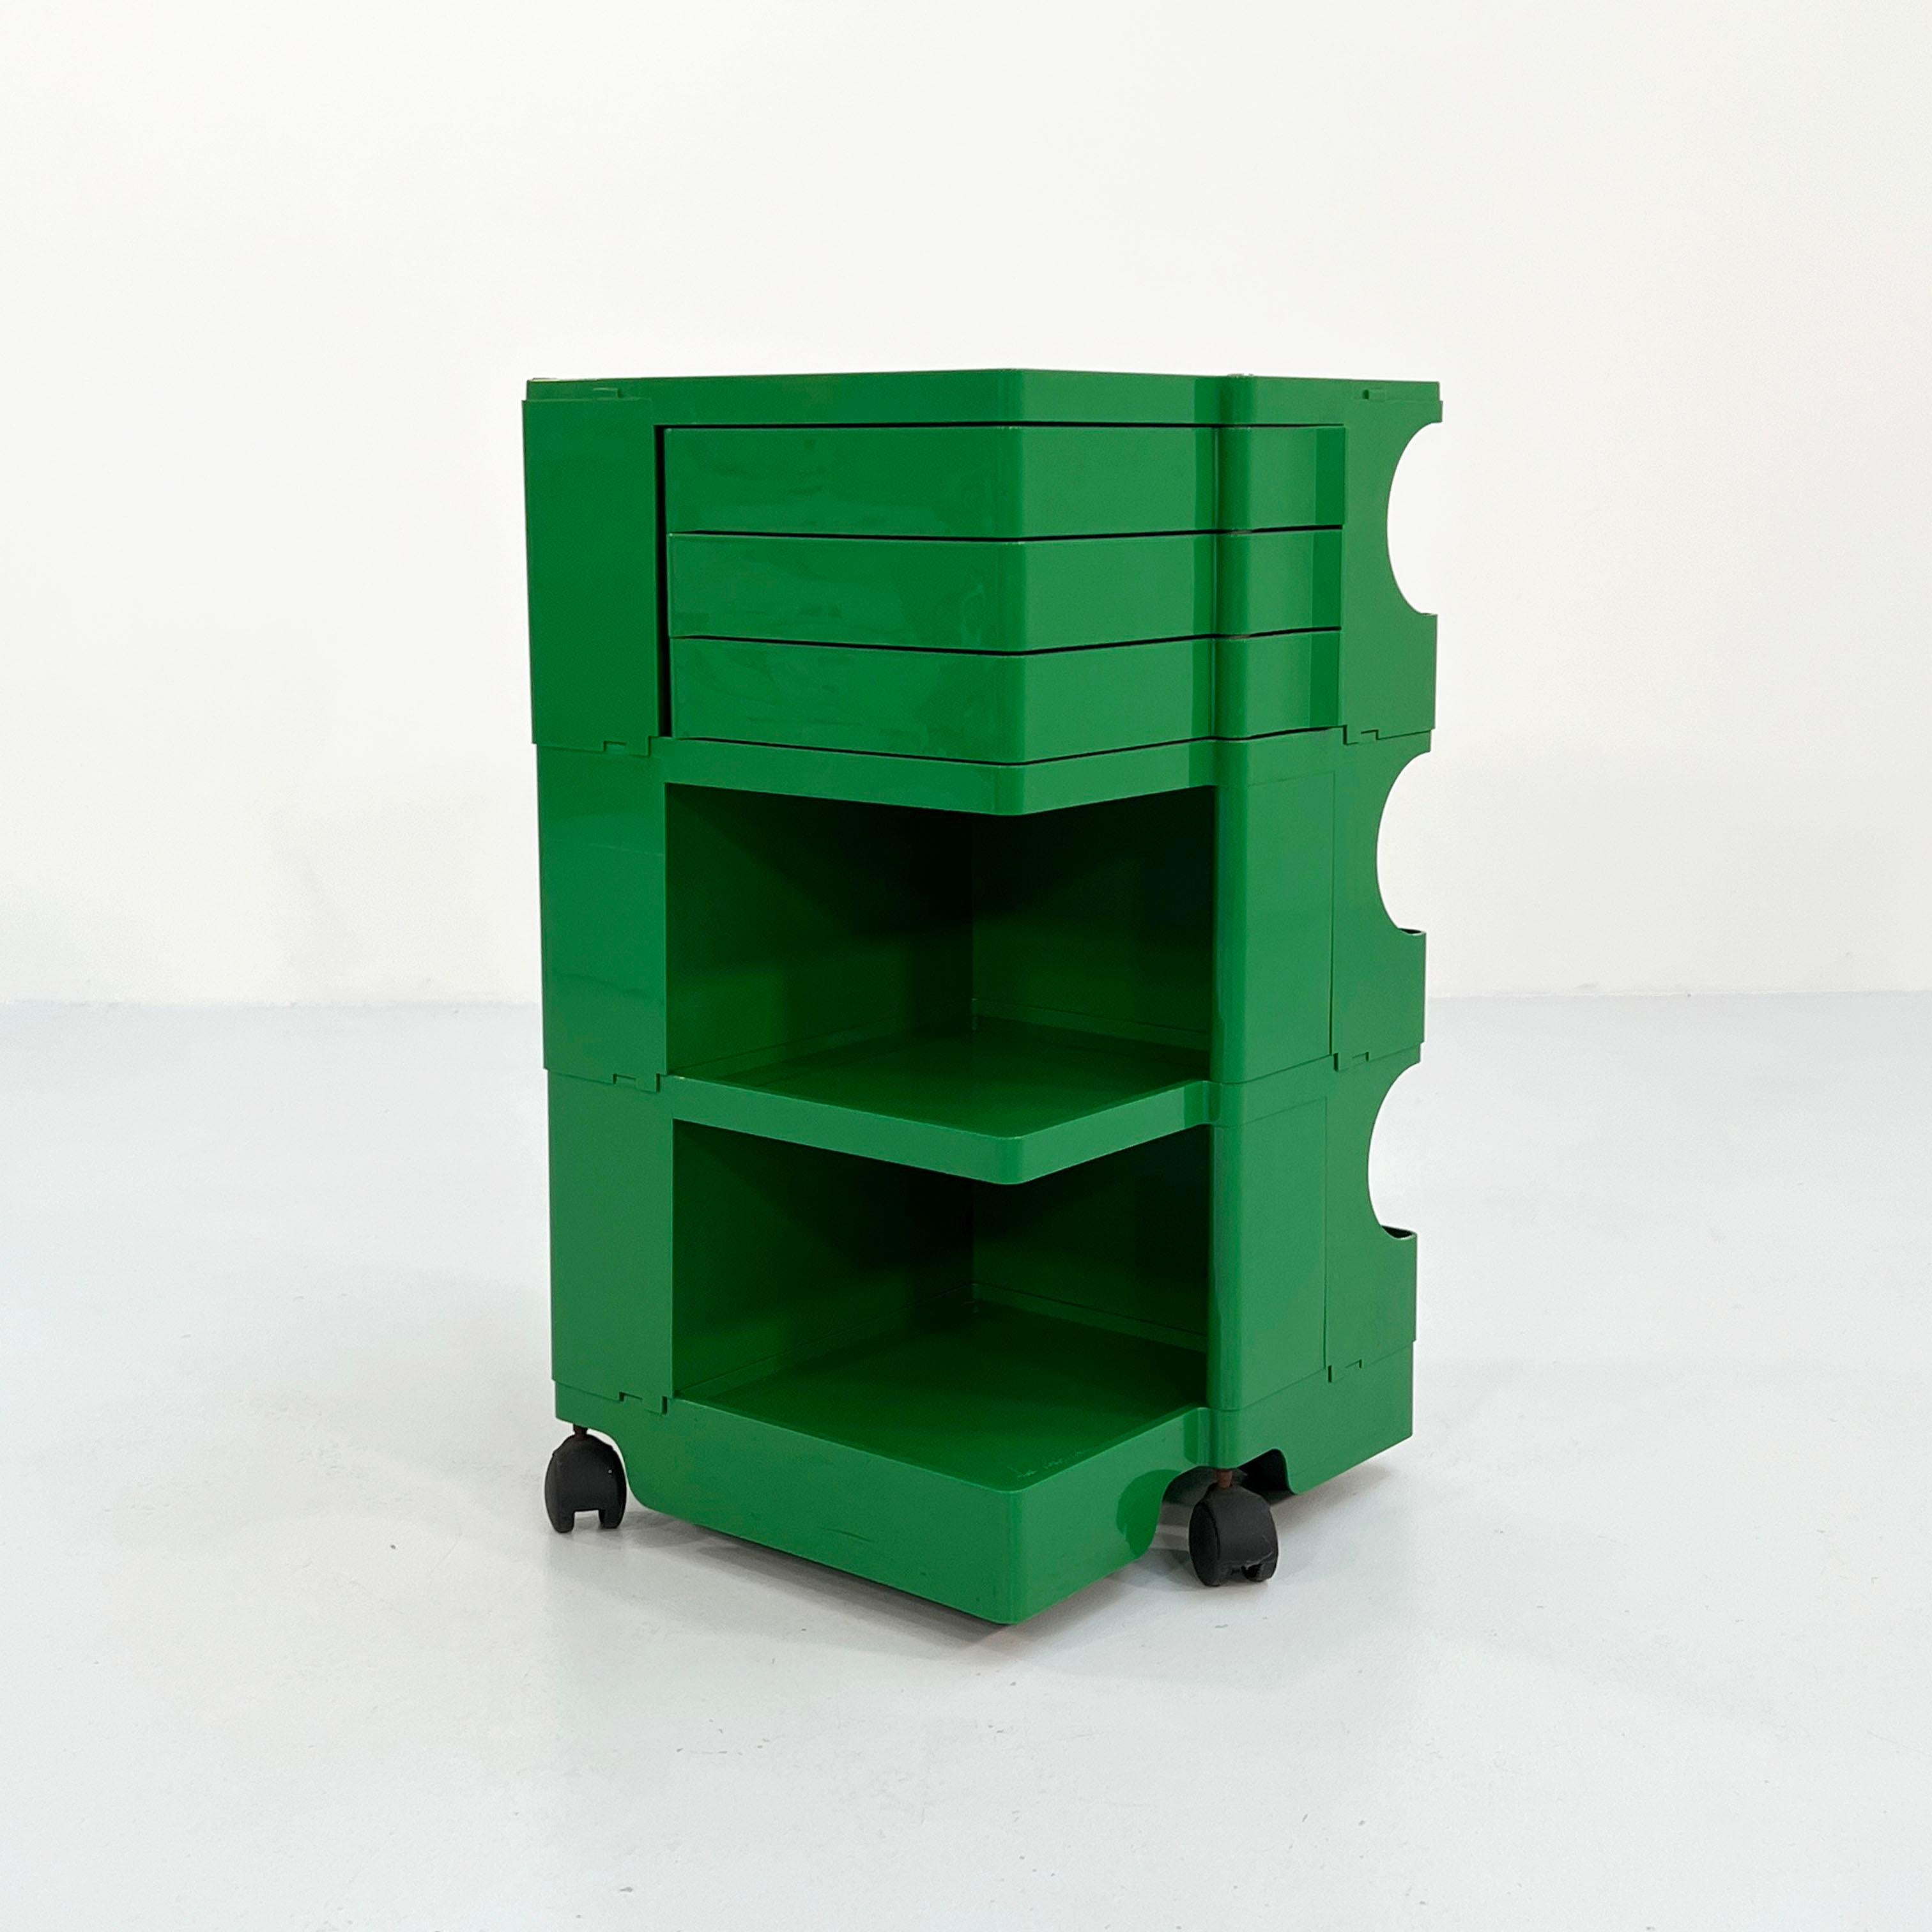 Green Boby Trolley by Joe Colombo for Bieffeplast, 1960s
Designer - Joe Colombo 
Producer - Bieffeplast
Model - Boby Trolley
Design Period - Sixties
Measurements - width 41 cm x depth 39 cm x height 74 cm
Materials - Plastic
Color -